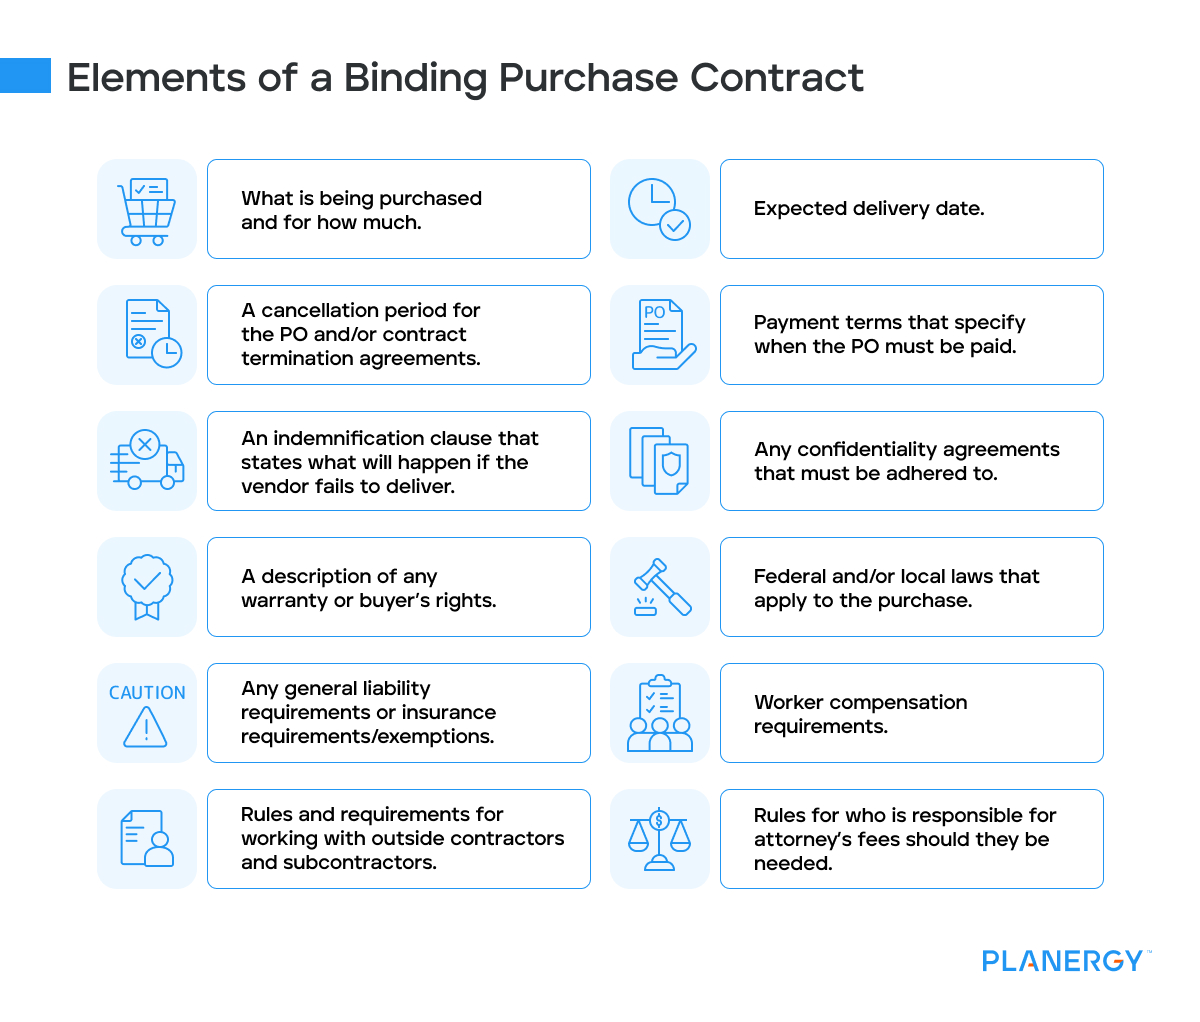 Elements of a Legally Binding Purchase Contract